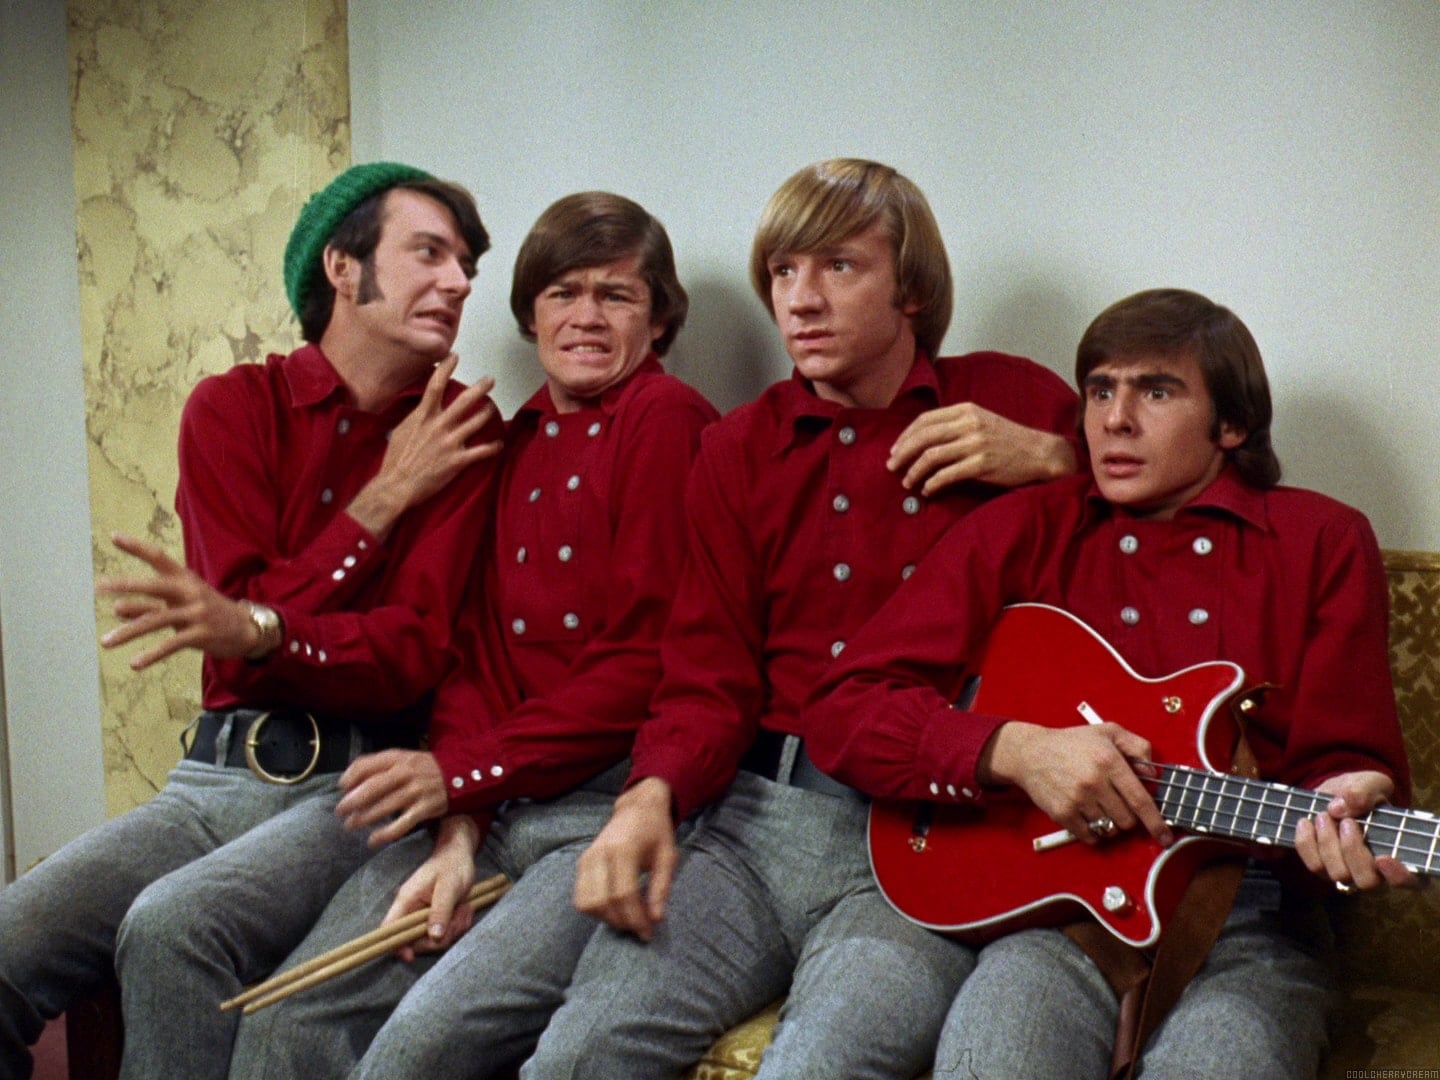 monkees, sunshine factory, mike nesmith, davy jones, micky dolenz, peter to...